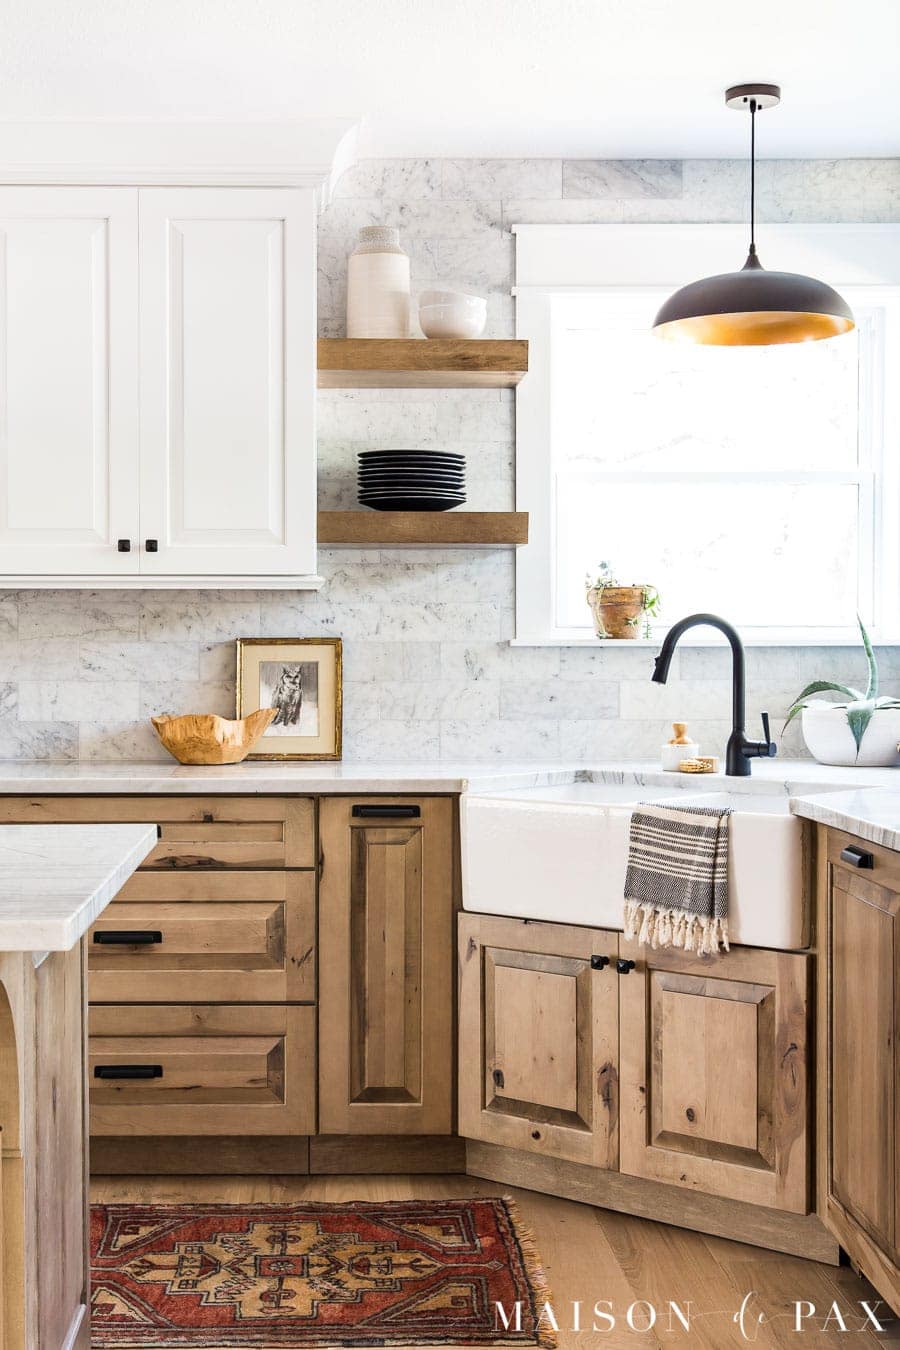 light wood lower cabinets with black hardware. white upper cabinets, farmhouse sink